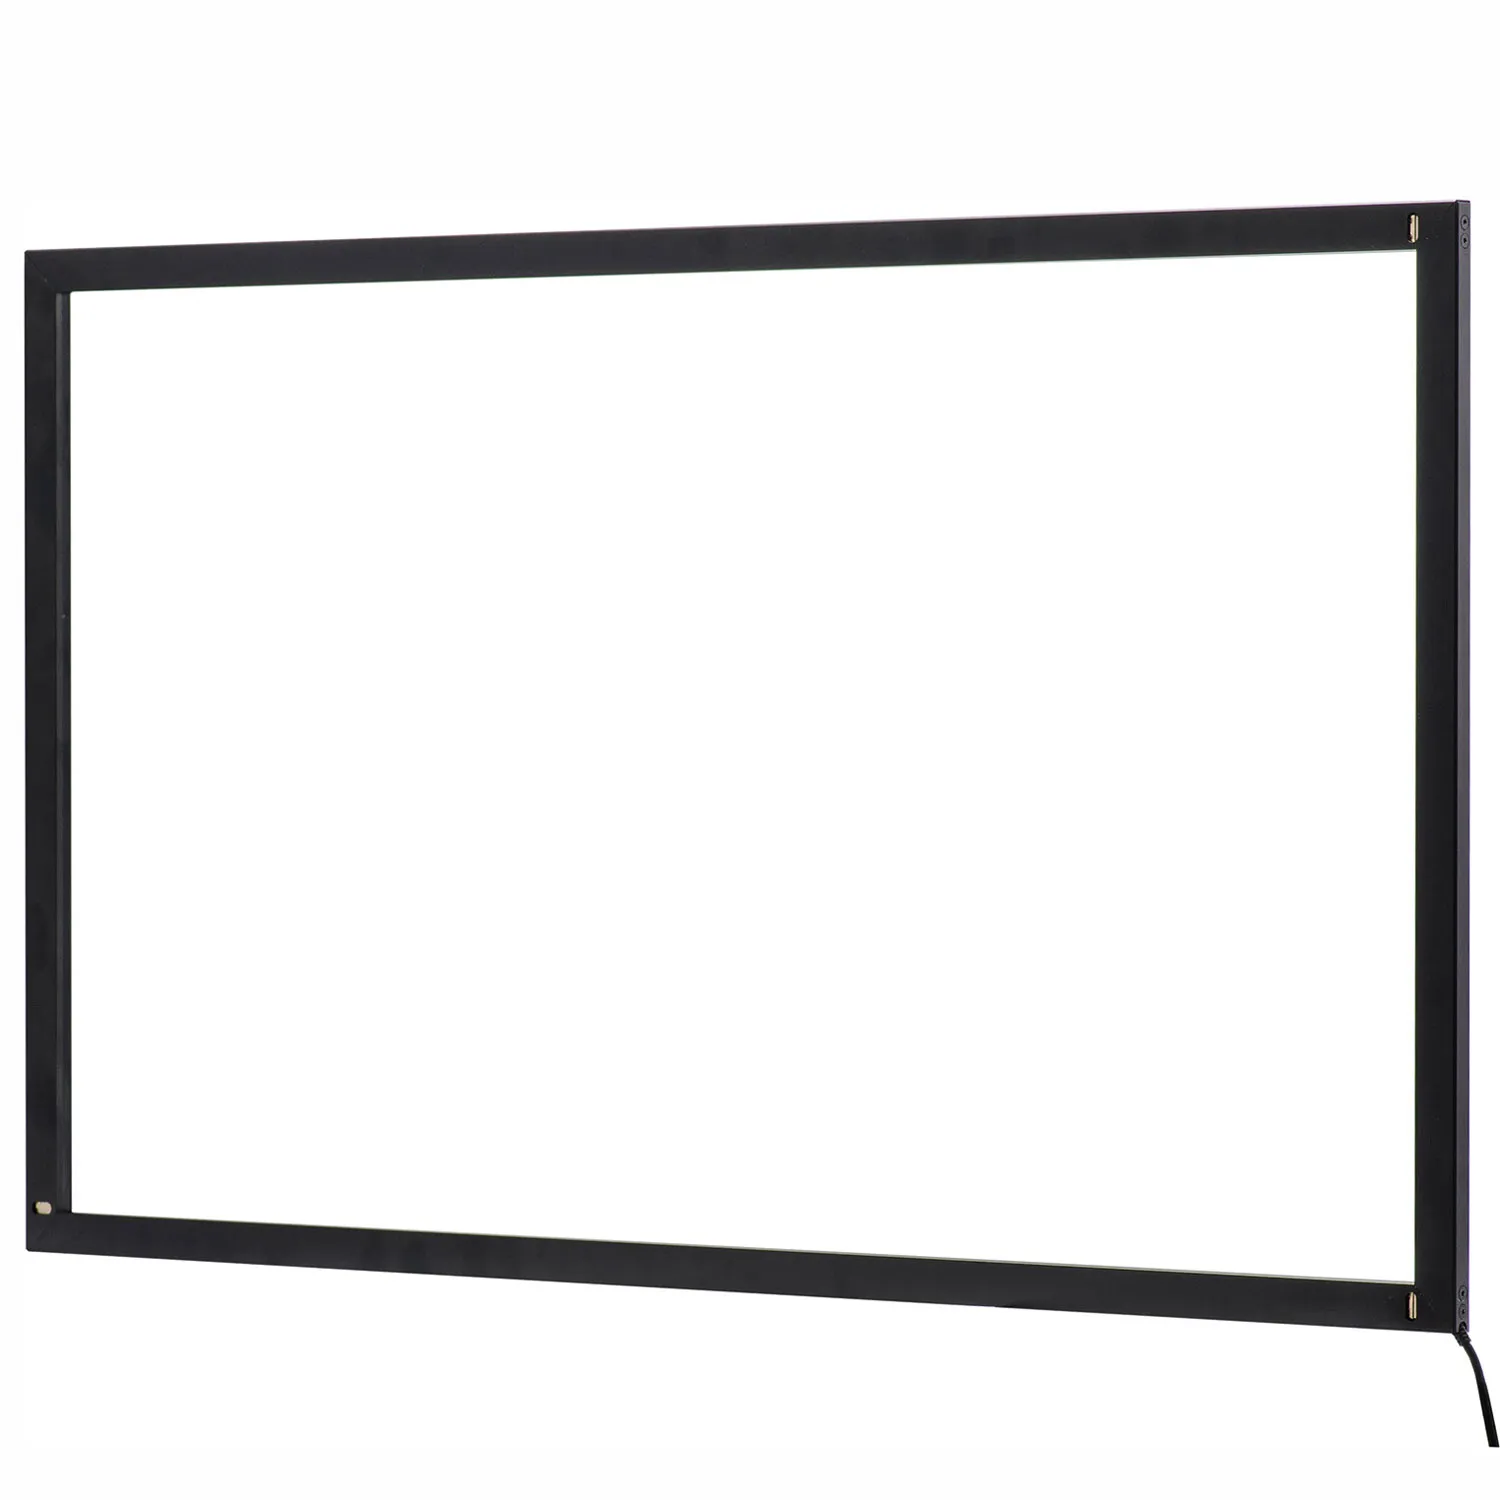 TOUCH FRAME KEETOUCH 84" KP-840-IP2S0U1